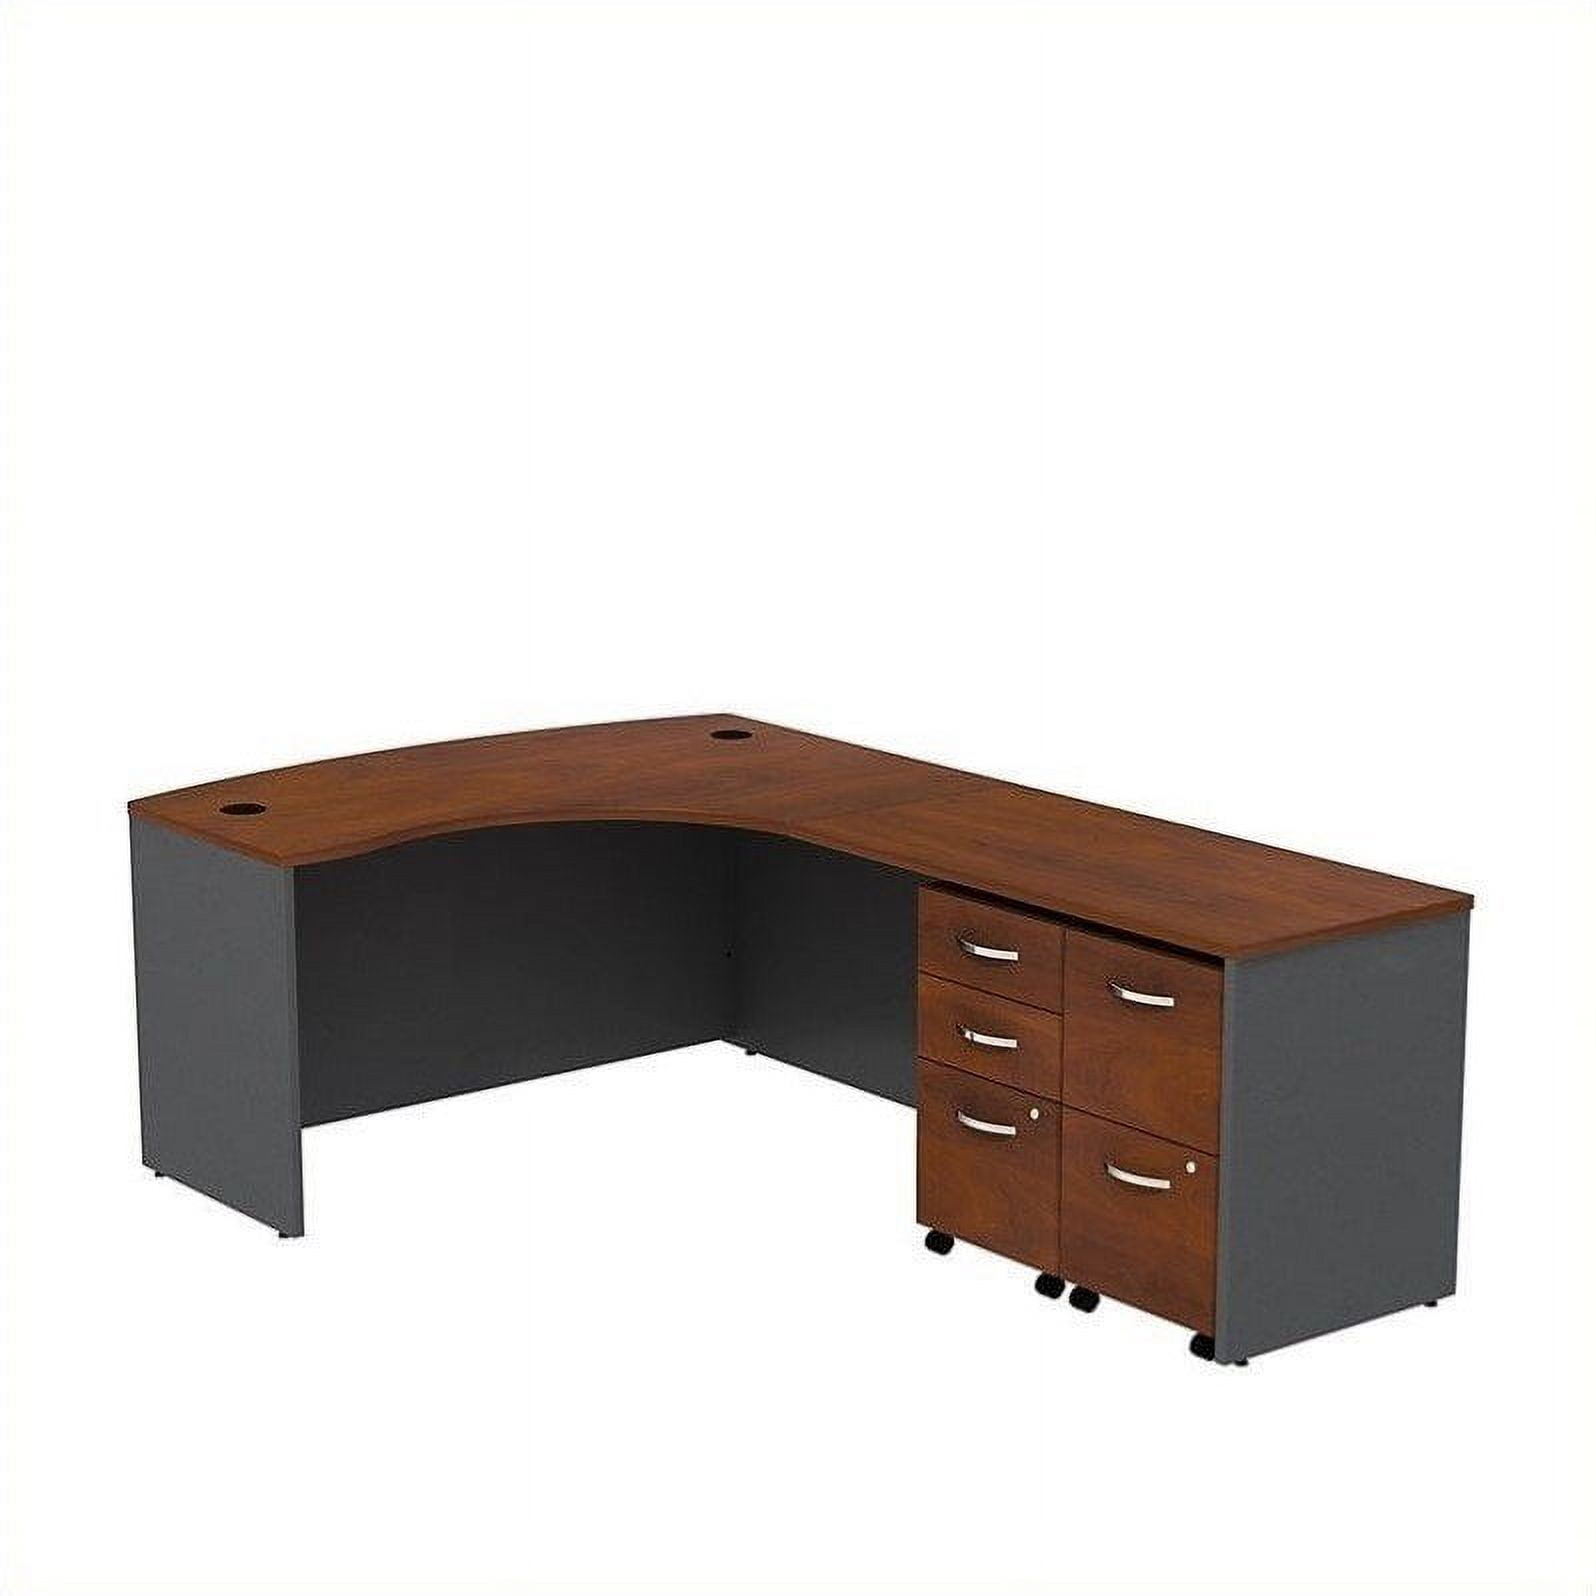 Picture of Bush Business Furniture SRC034HCRSU Series C Bow Front Right Handed L-Shaped Desk with 2 Mobile Pedestals - Hansen Cherry